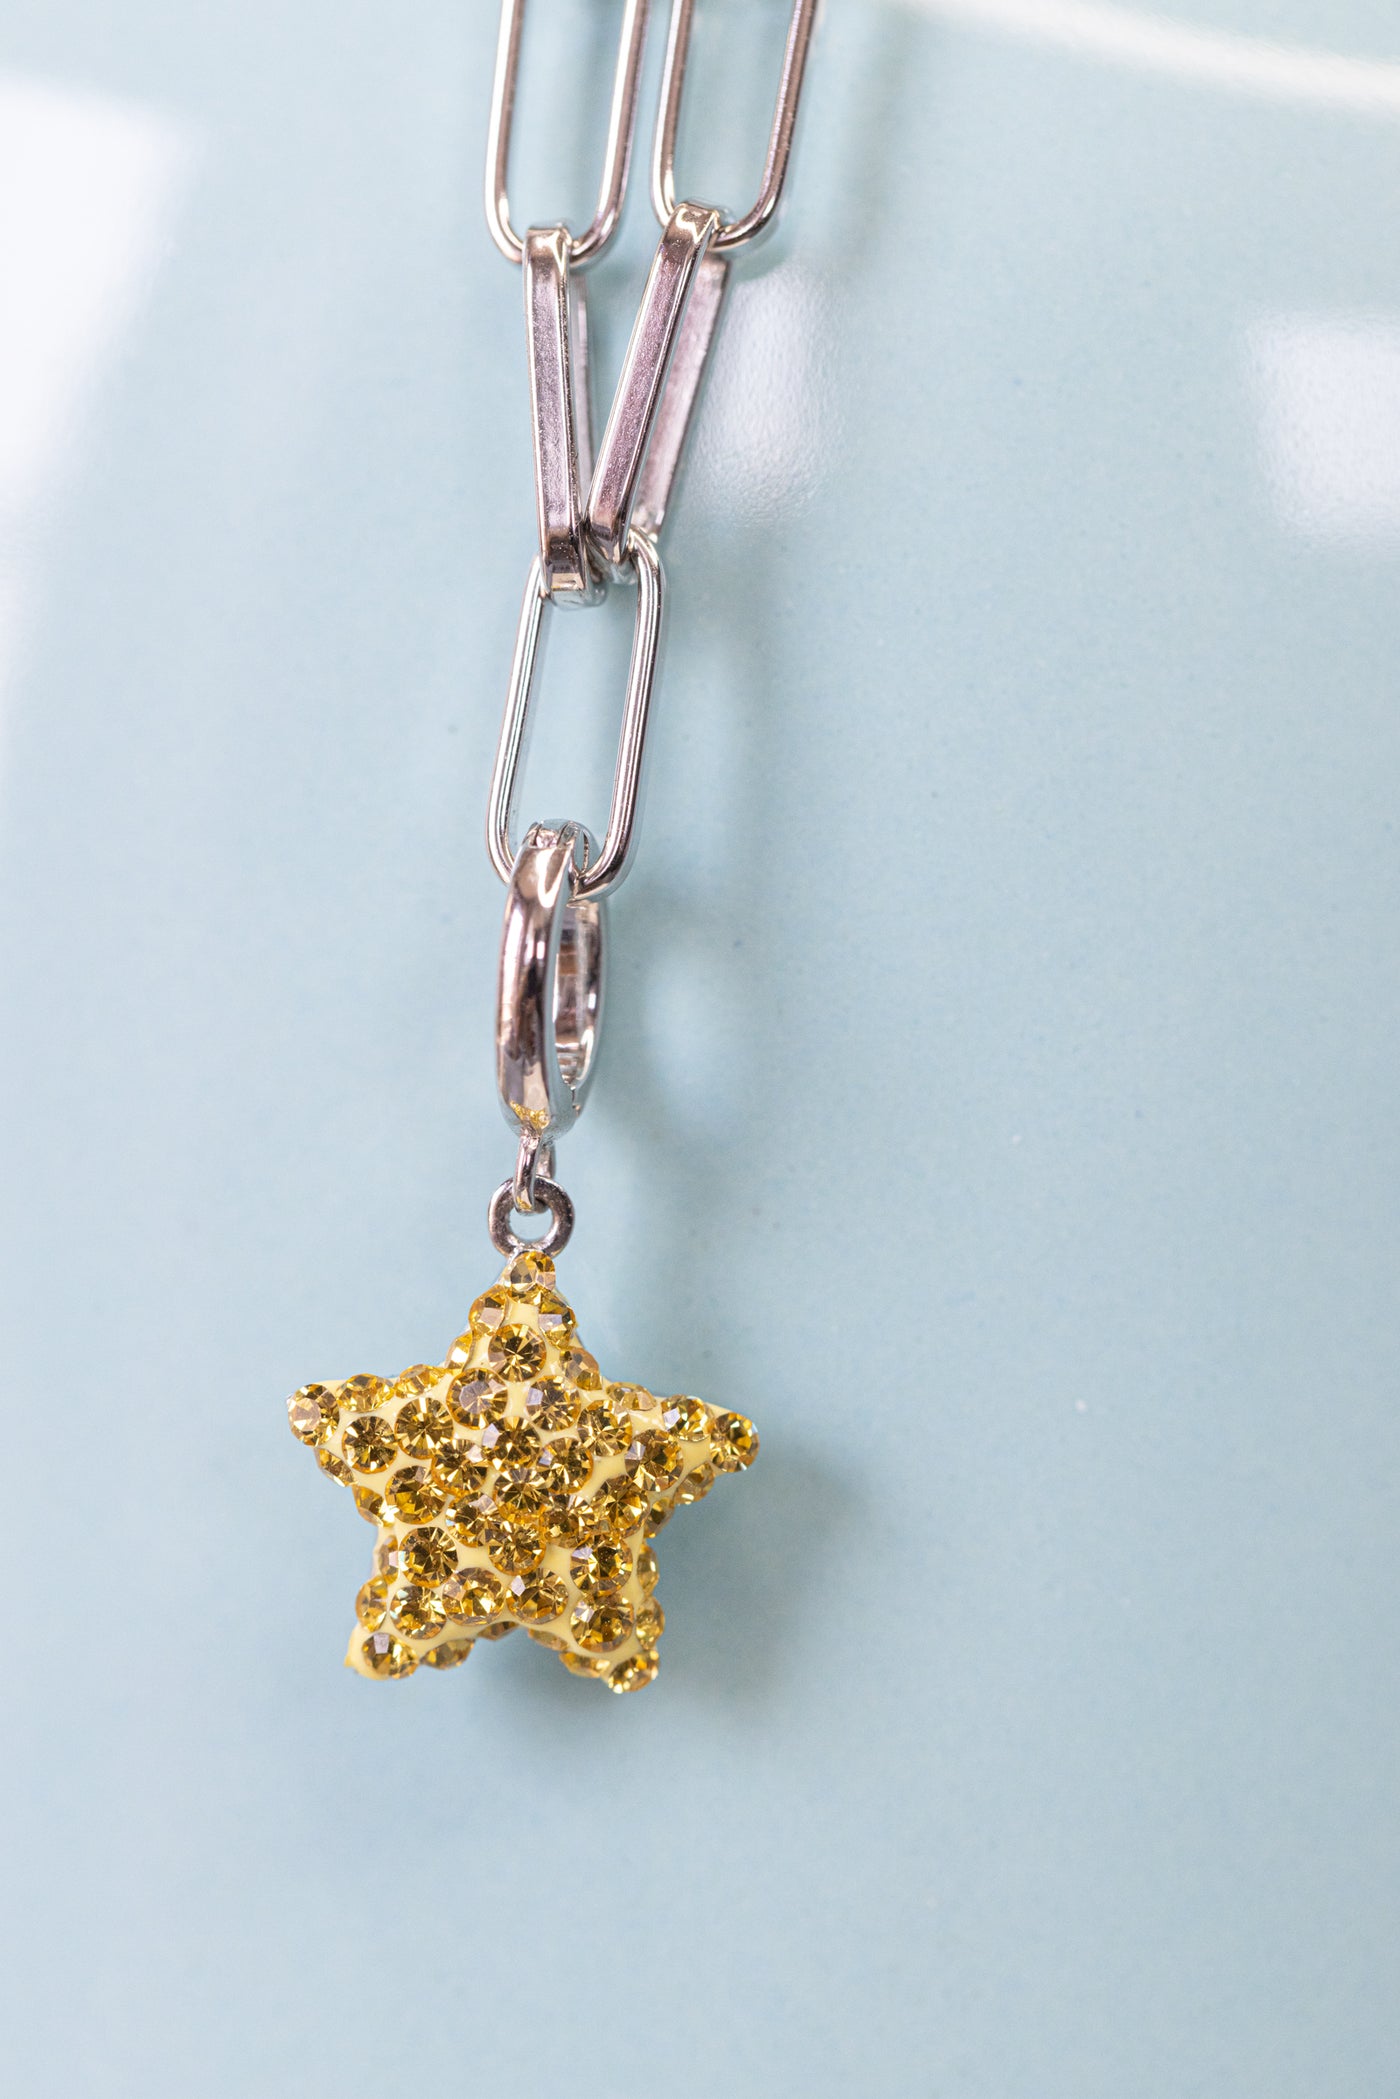 Yellow Star Crystal Sterling Silver Charm With Paperclip Bracelet